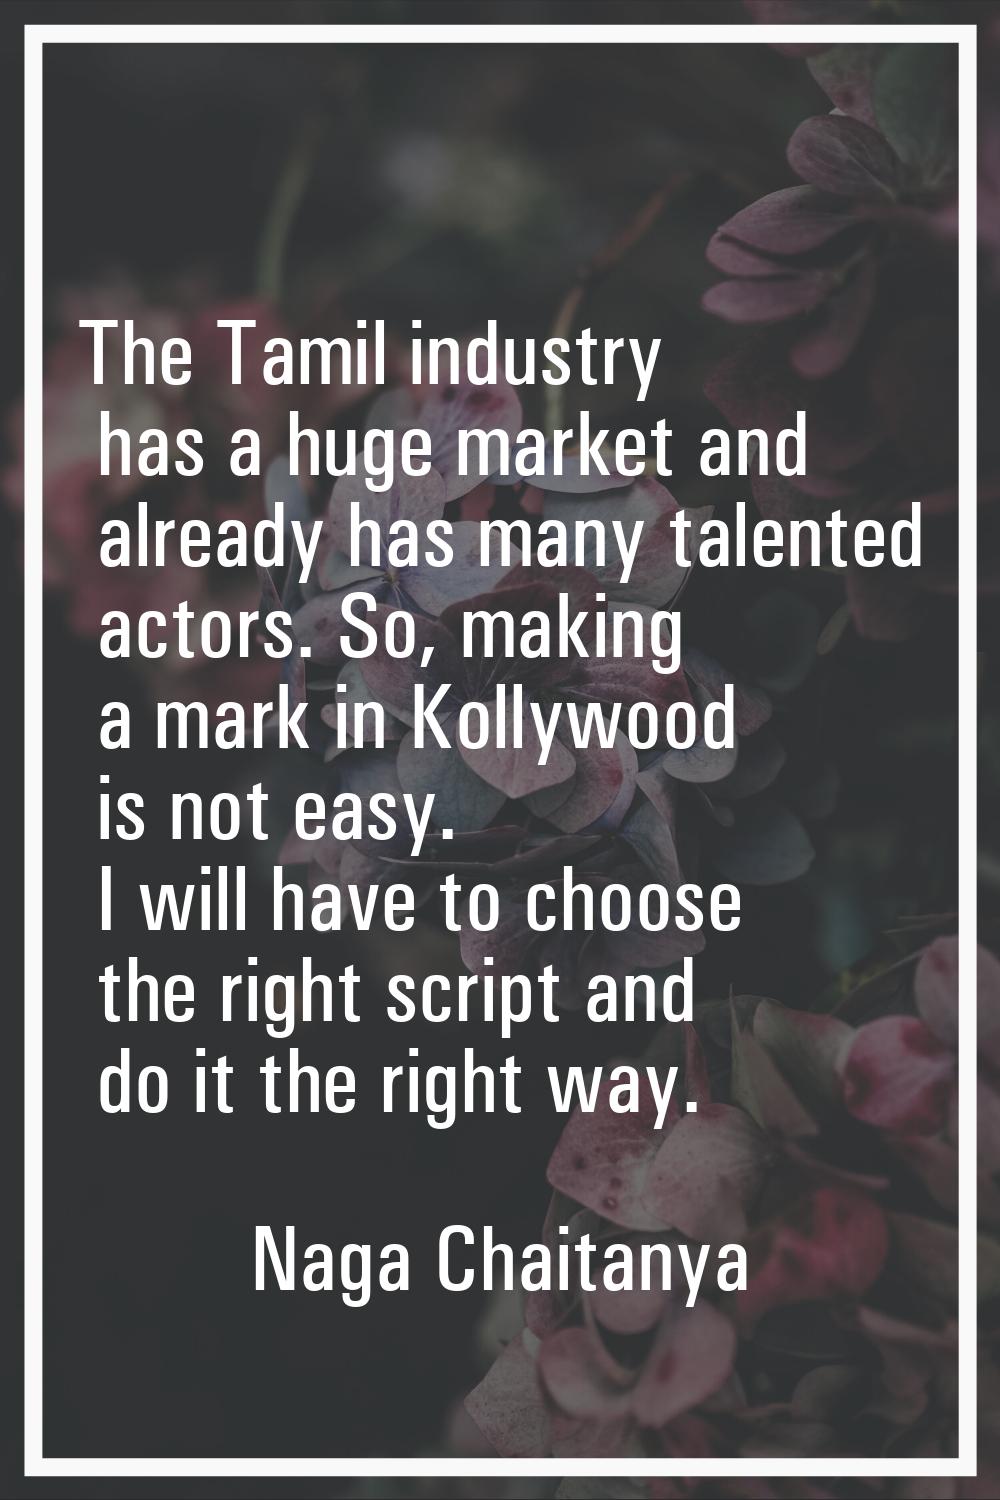 The Tamil industry has a huge market and already has many talented actors. So, making a mark in Kol